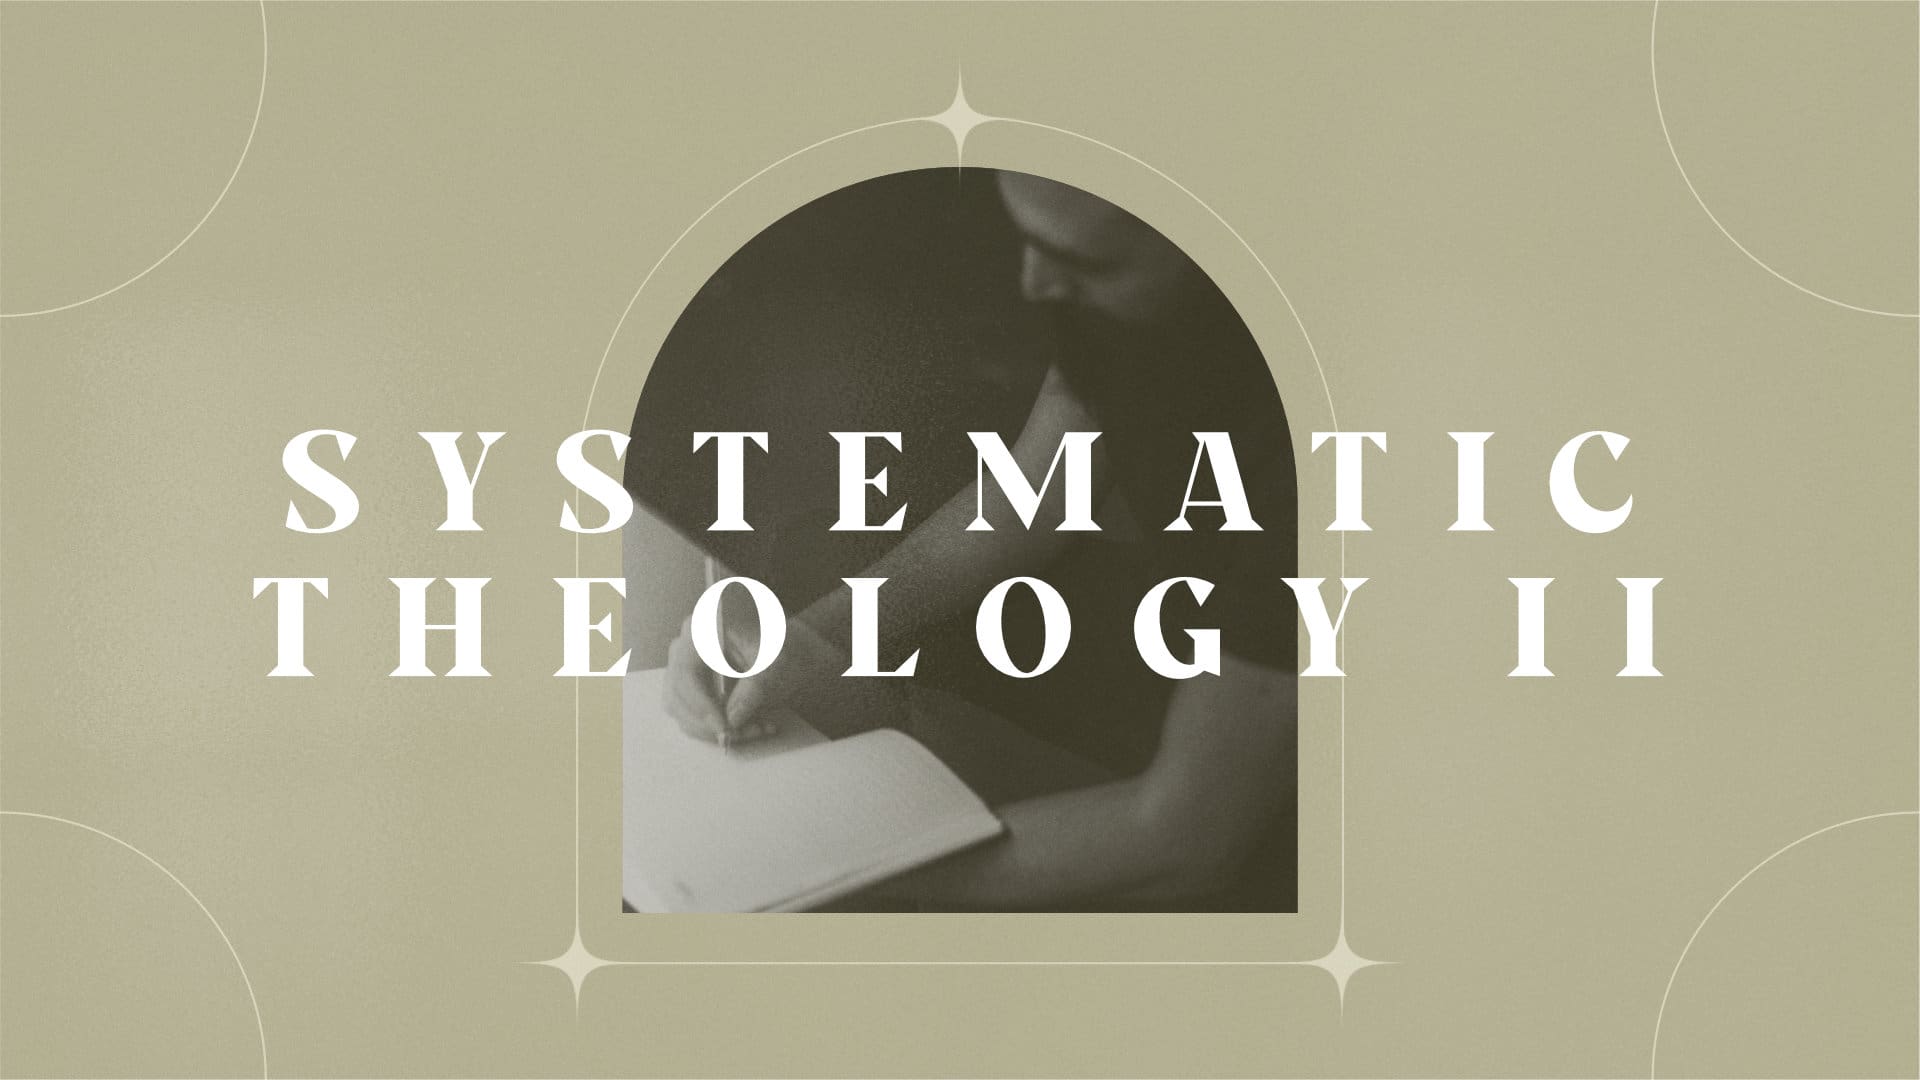 Introduction to Systematic Theology II